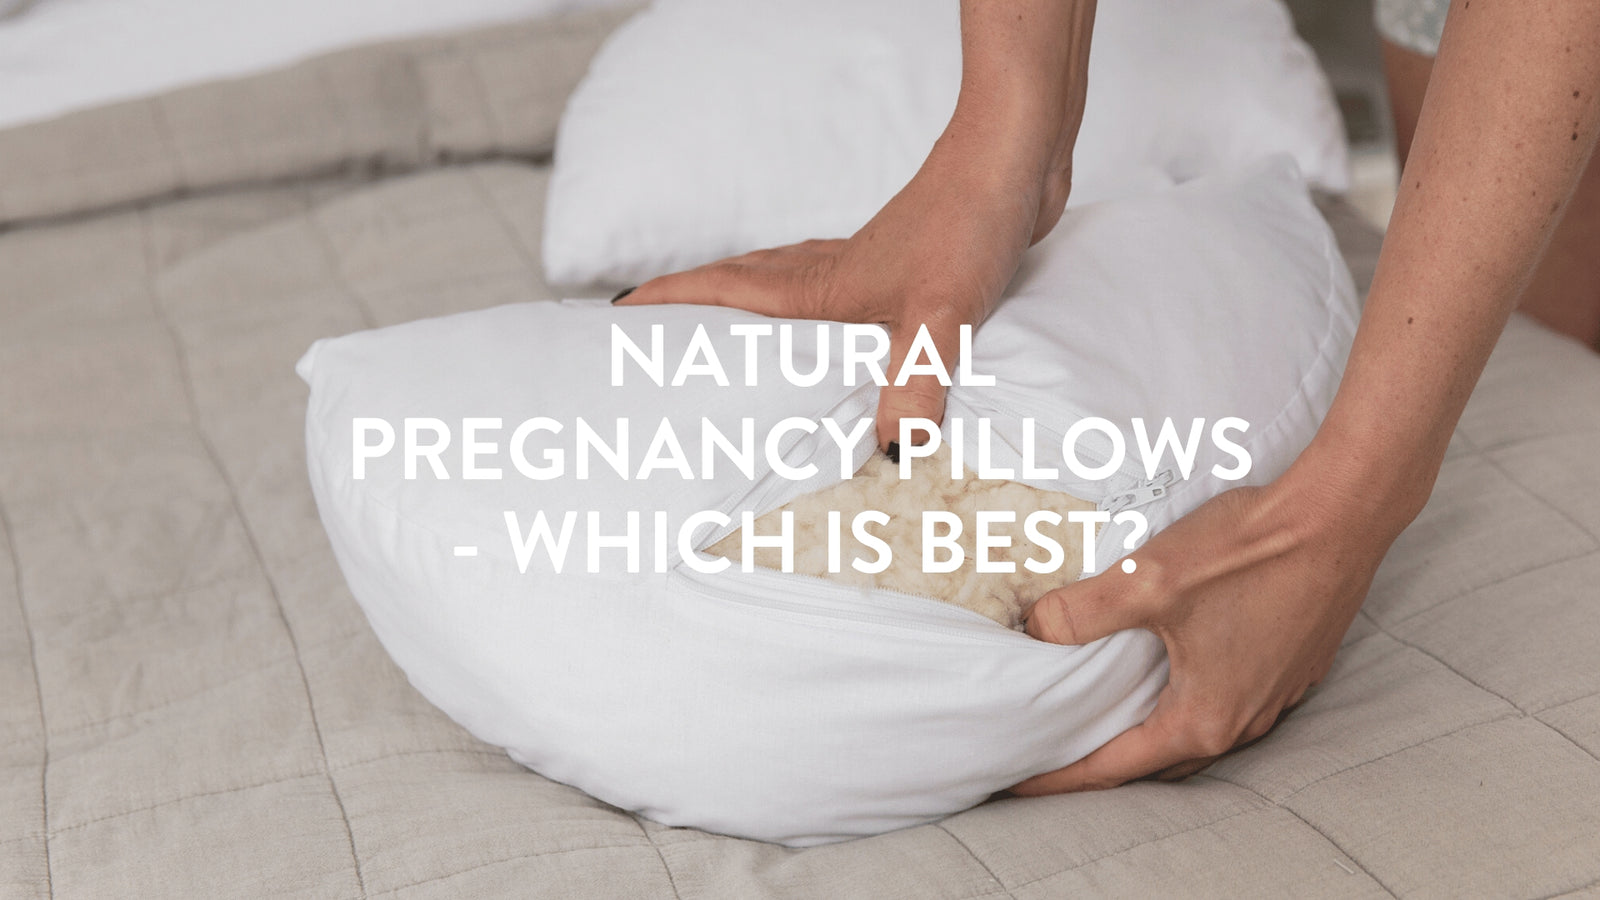 Natural Pregnancy Pillows - Which is Best?